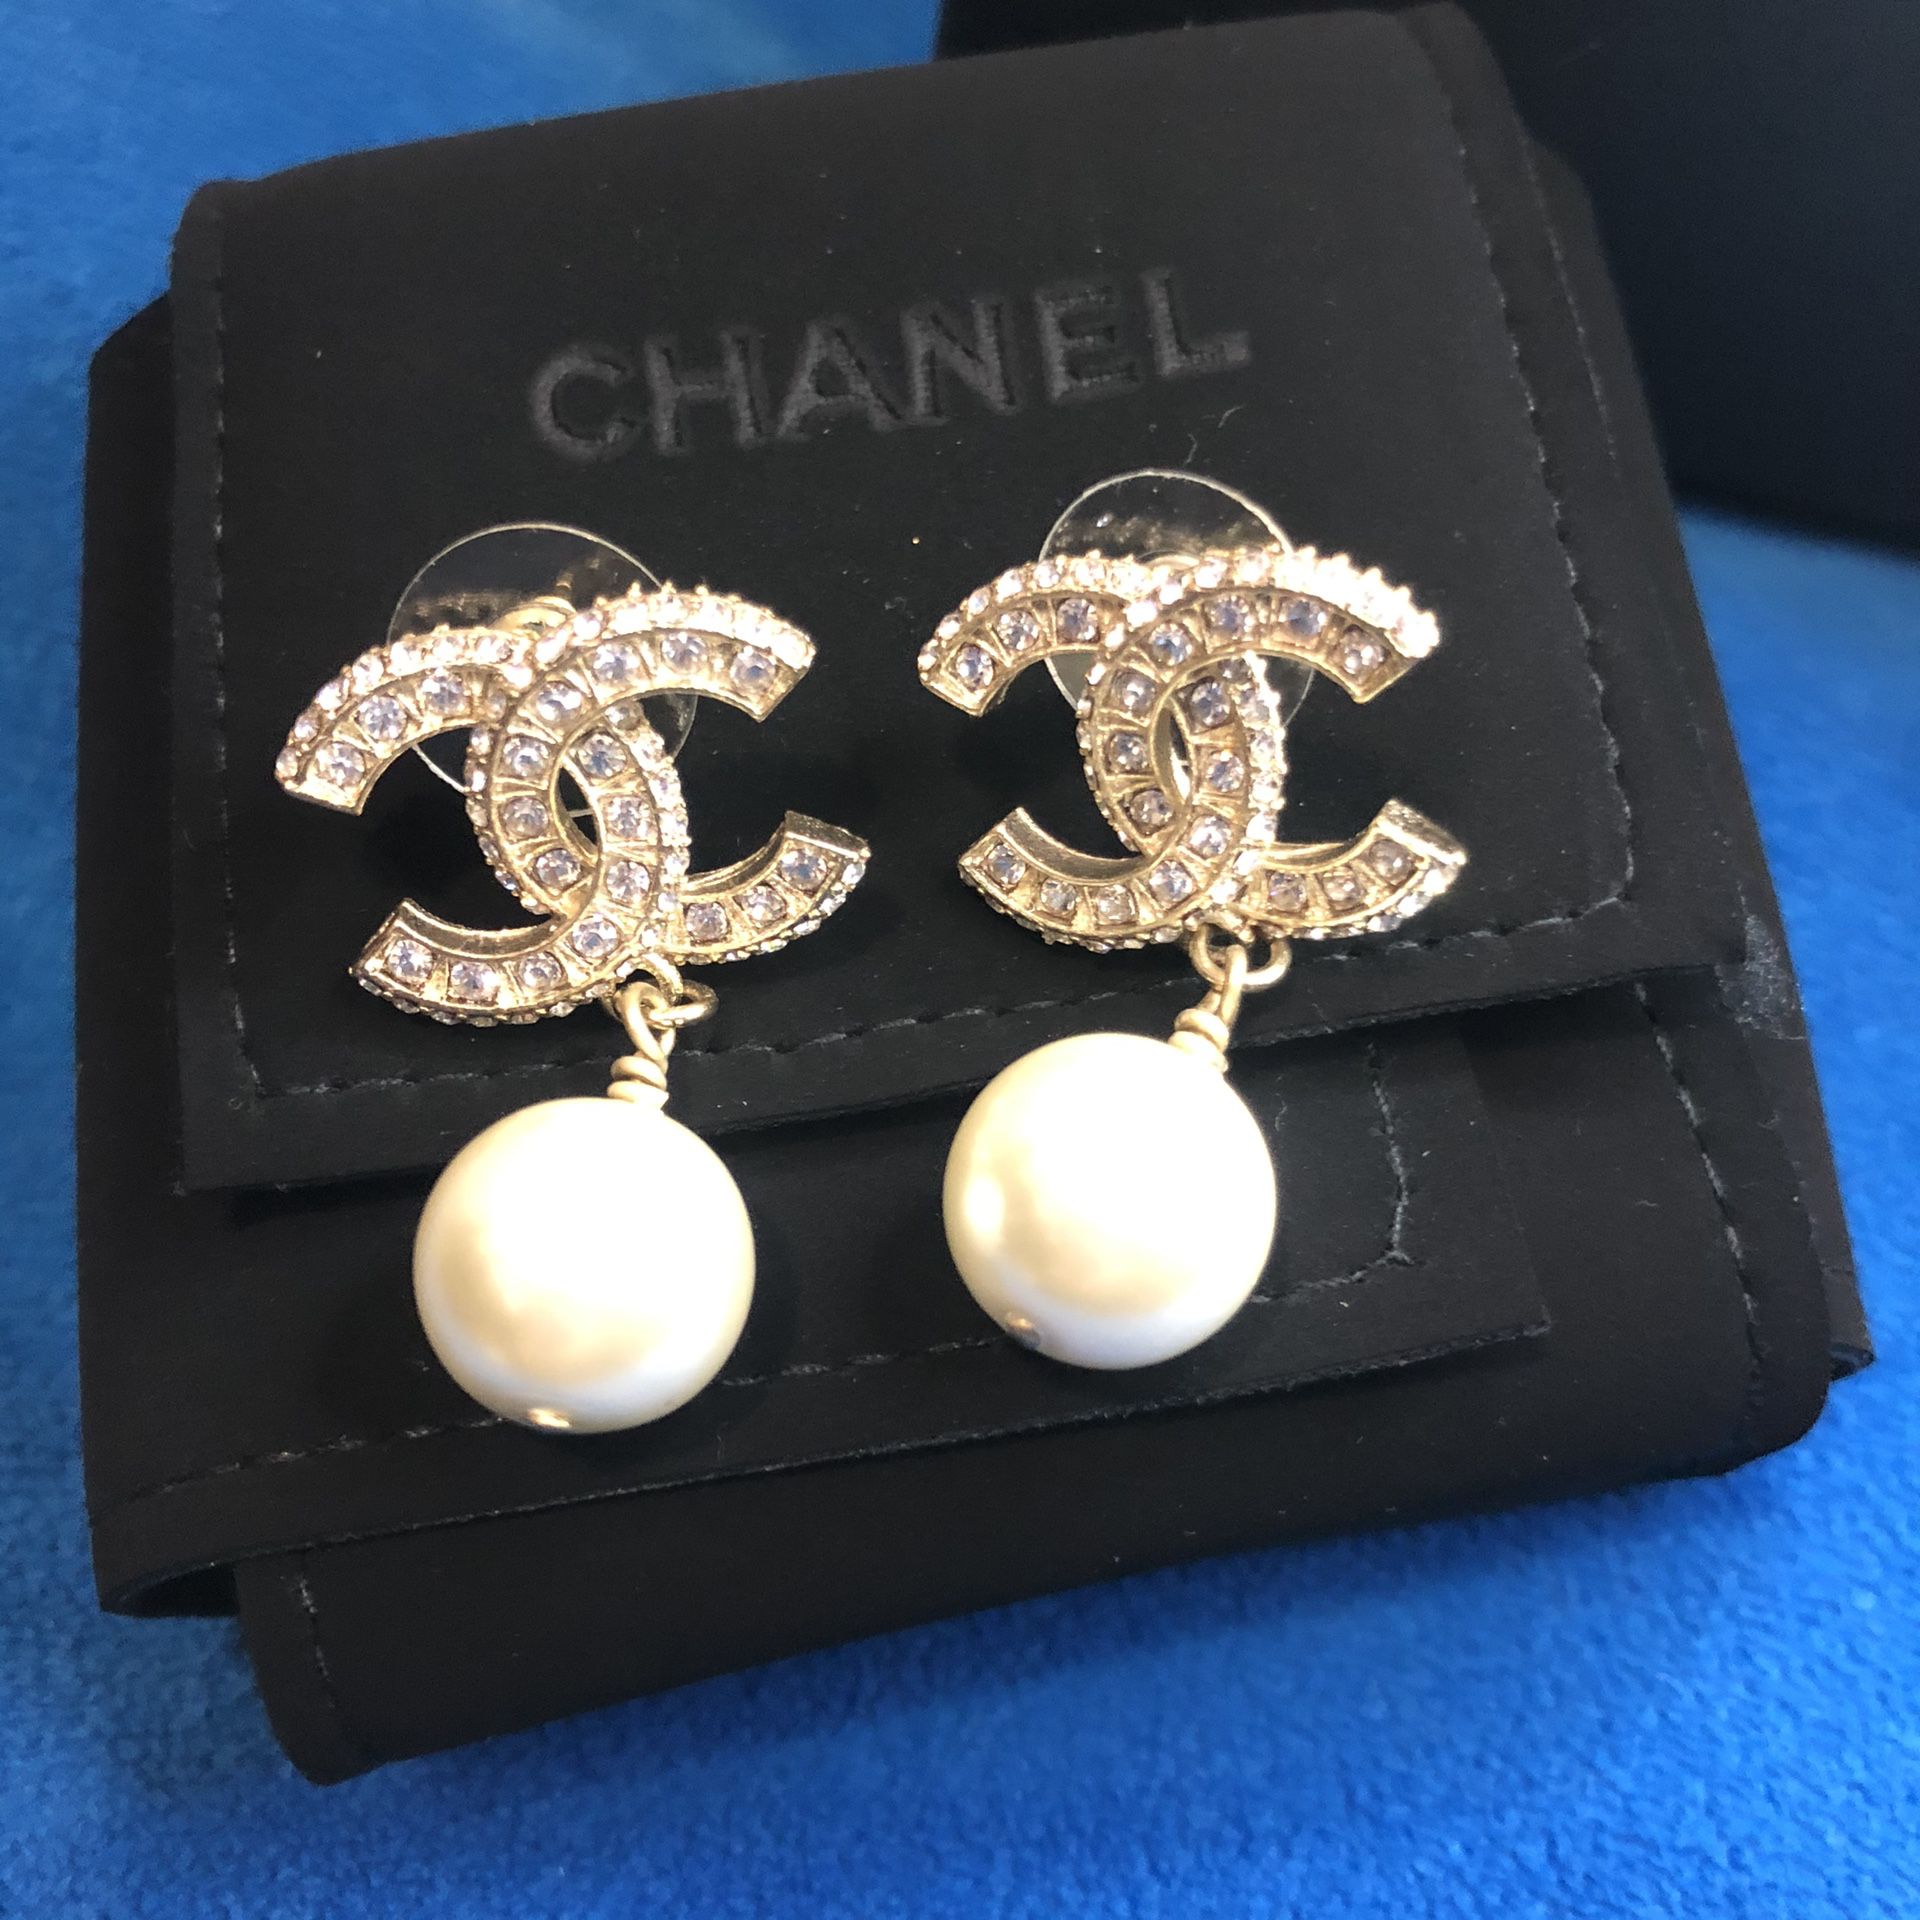 Chanel earrings with pearl